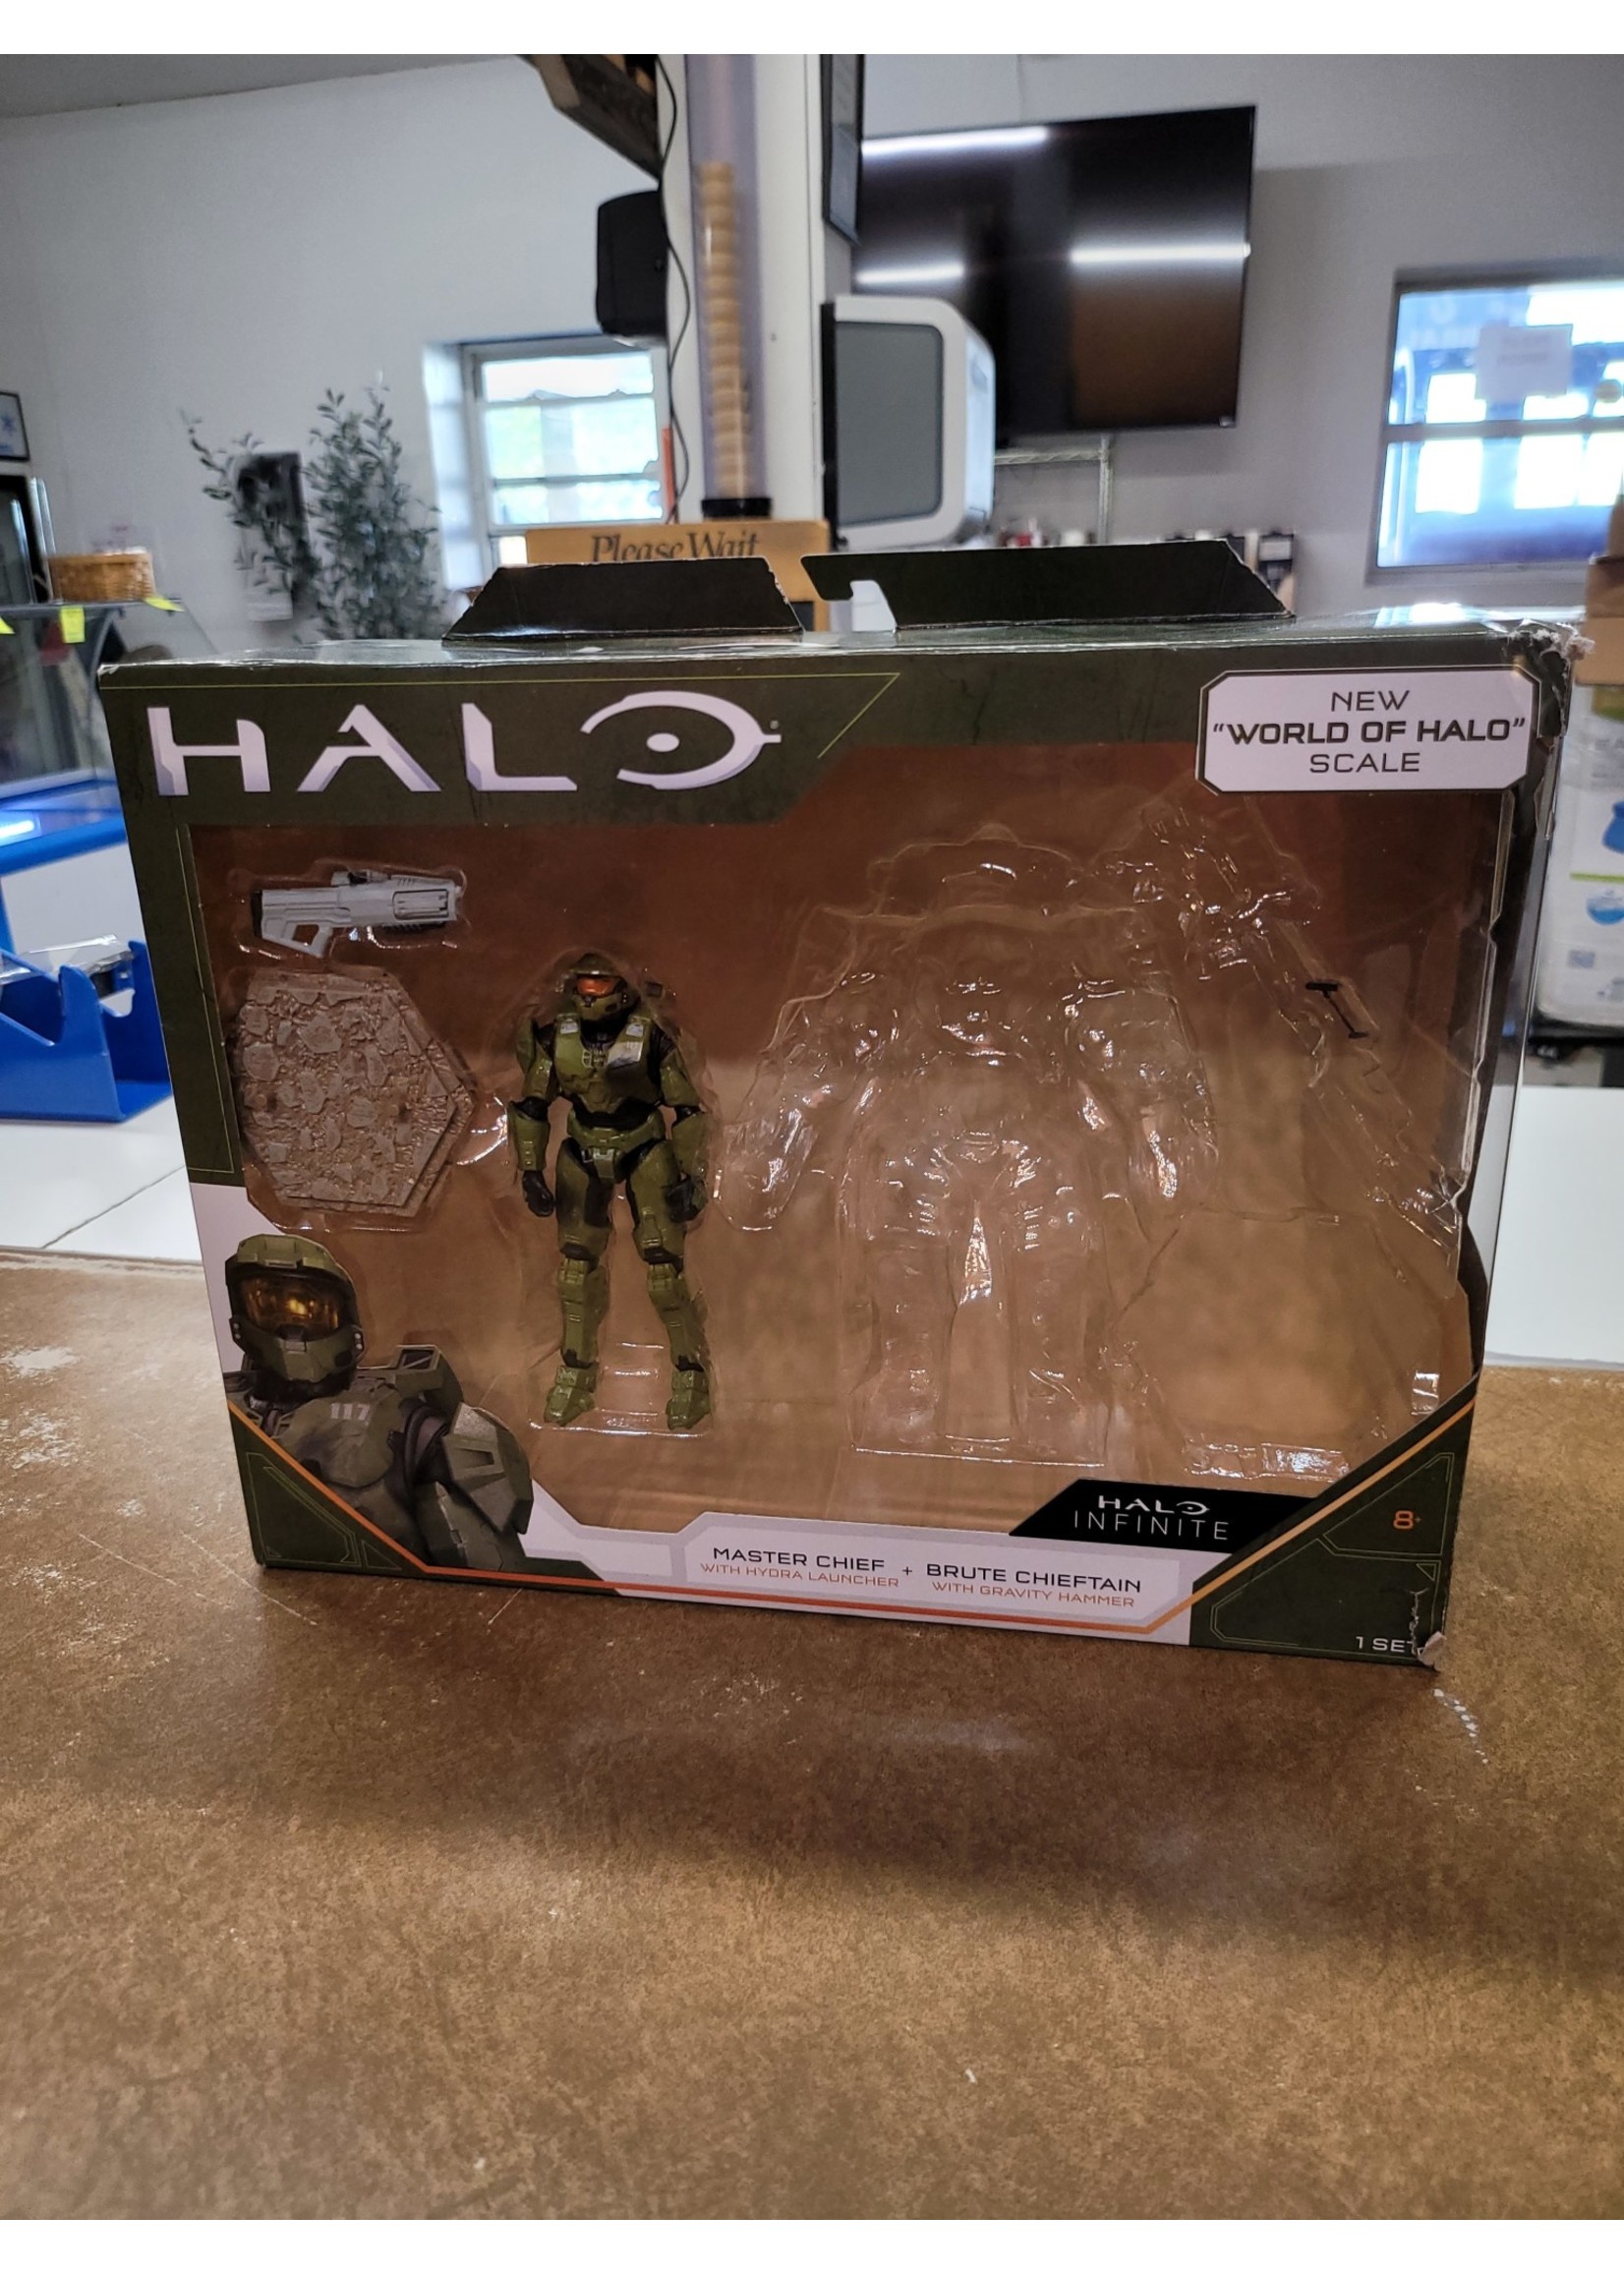 *Missing Brute Chieftain HALO - 4" Master Chief vs. Brute Chieftain (Infinite)